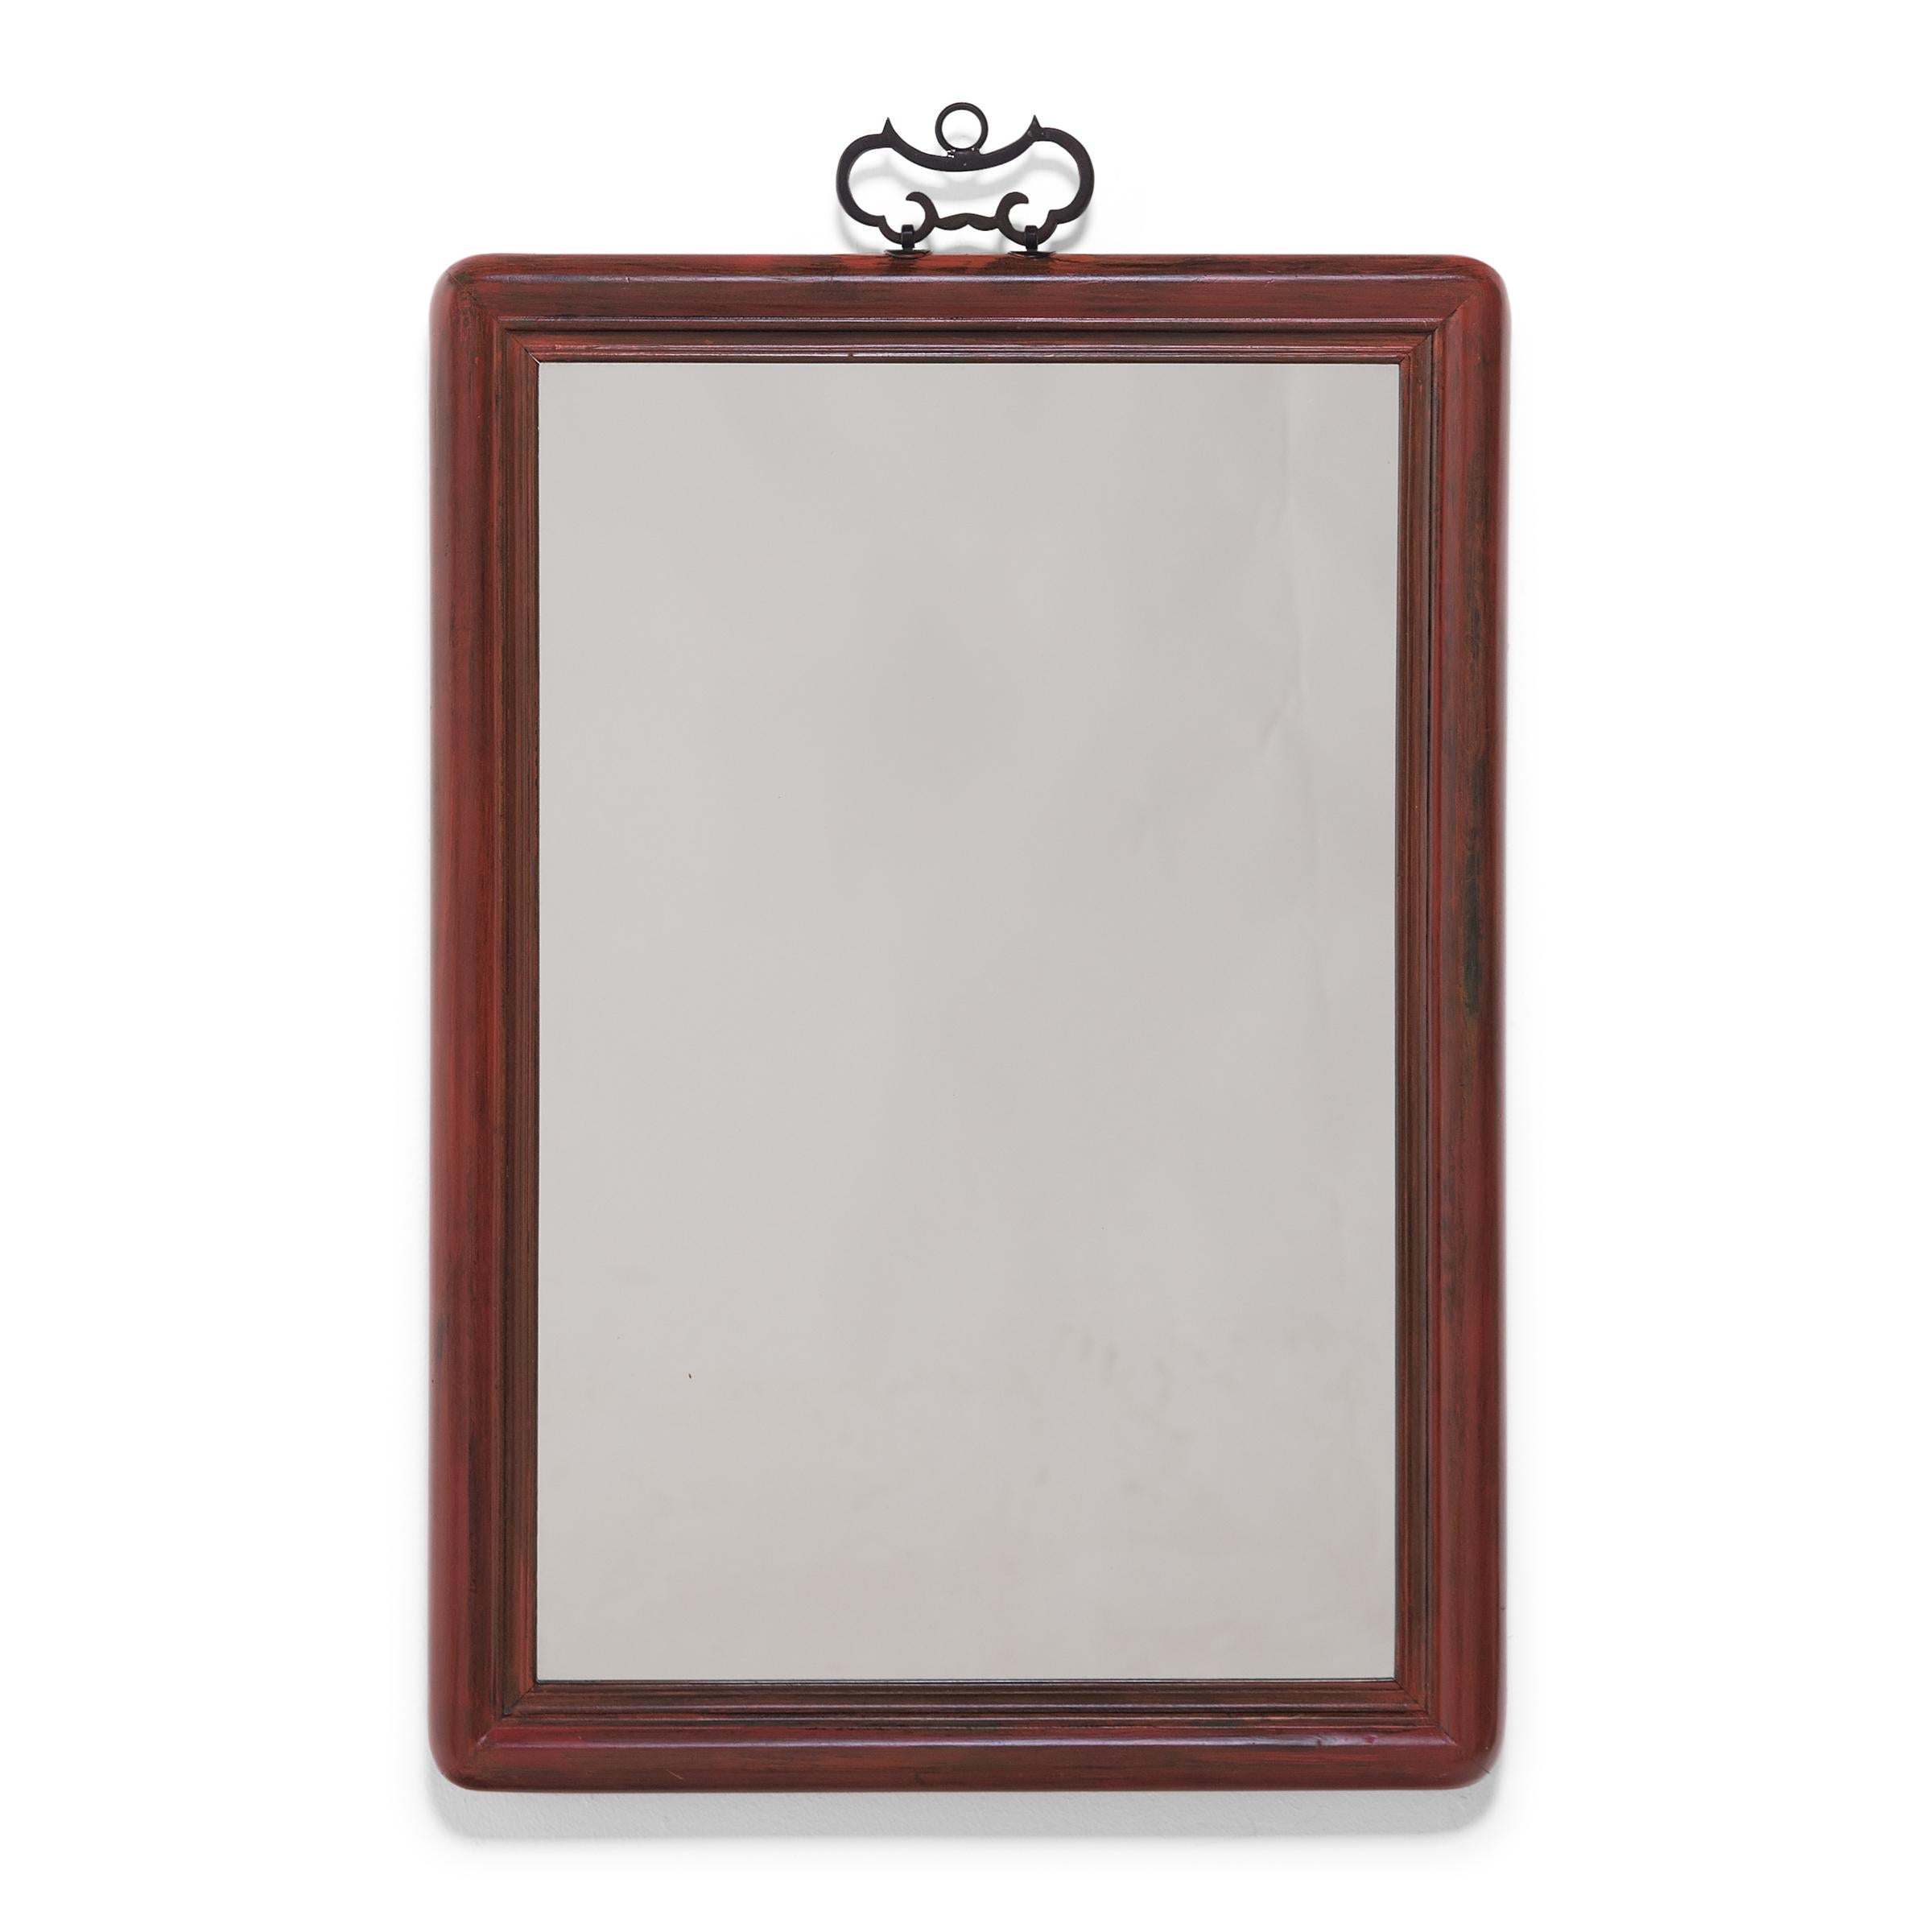 This pair of rectangular wall mirrors feature early 20th-century frames crafted of a fine-grained hardwood. At some point in their storied history, the frames were brushed with red paint, now gently worn to reveal the wood grain underneath. The